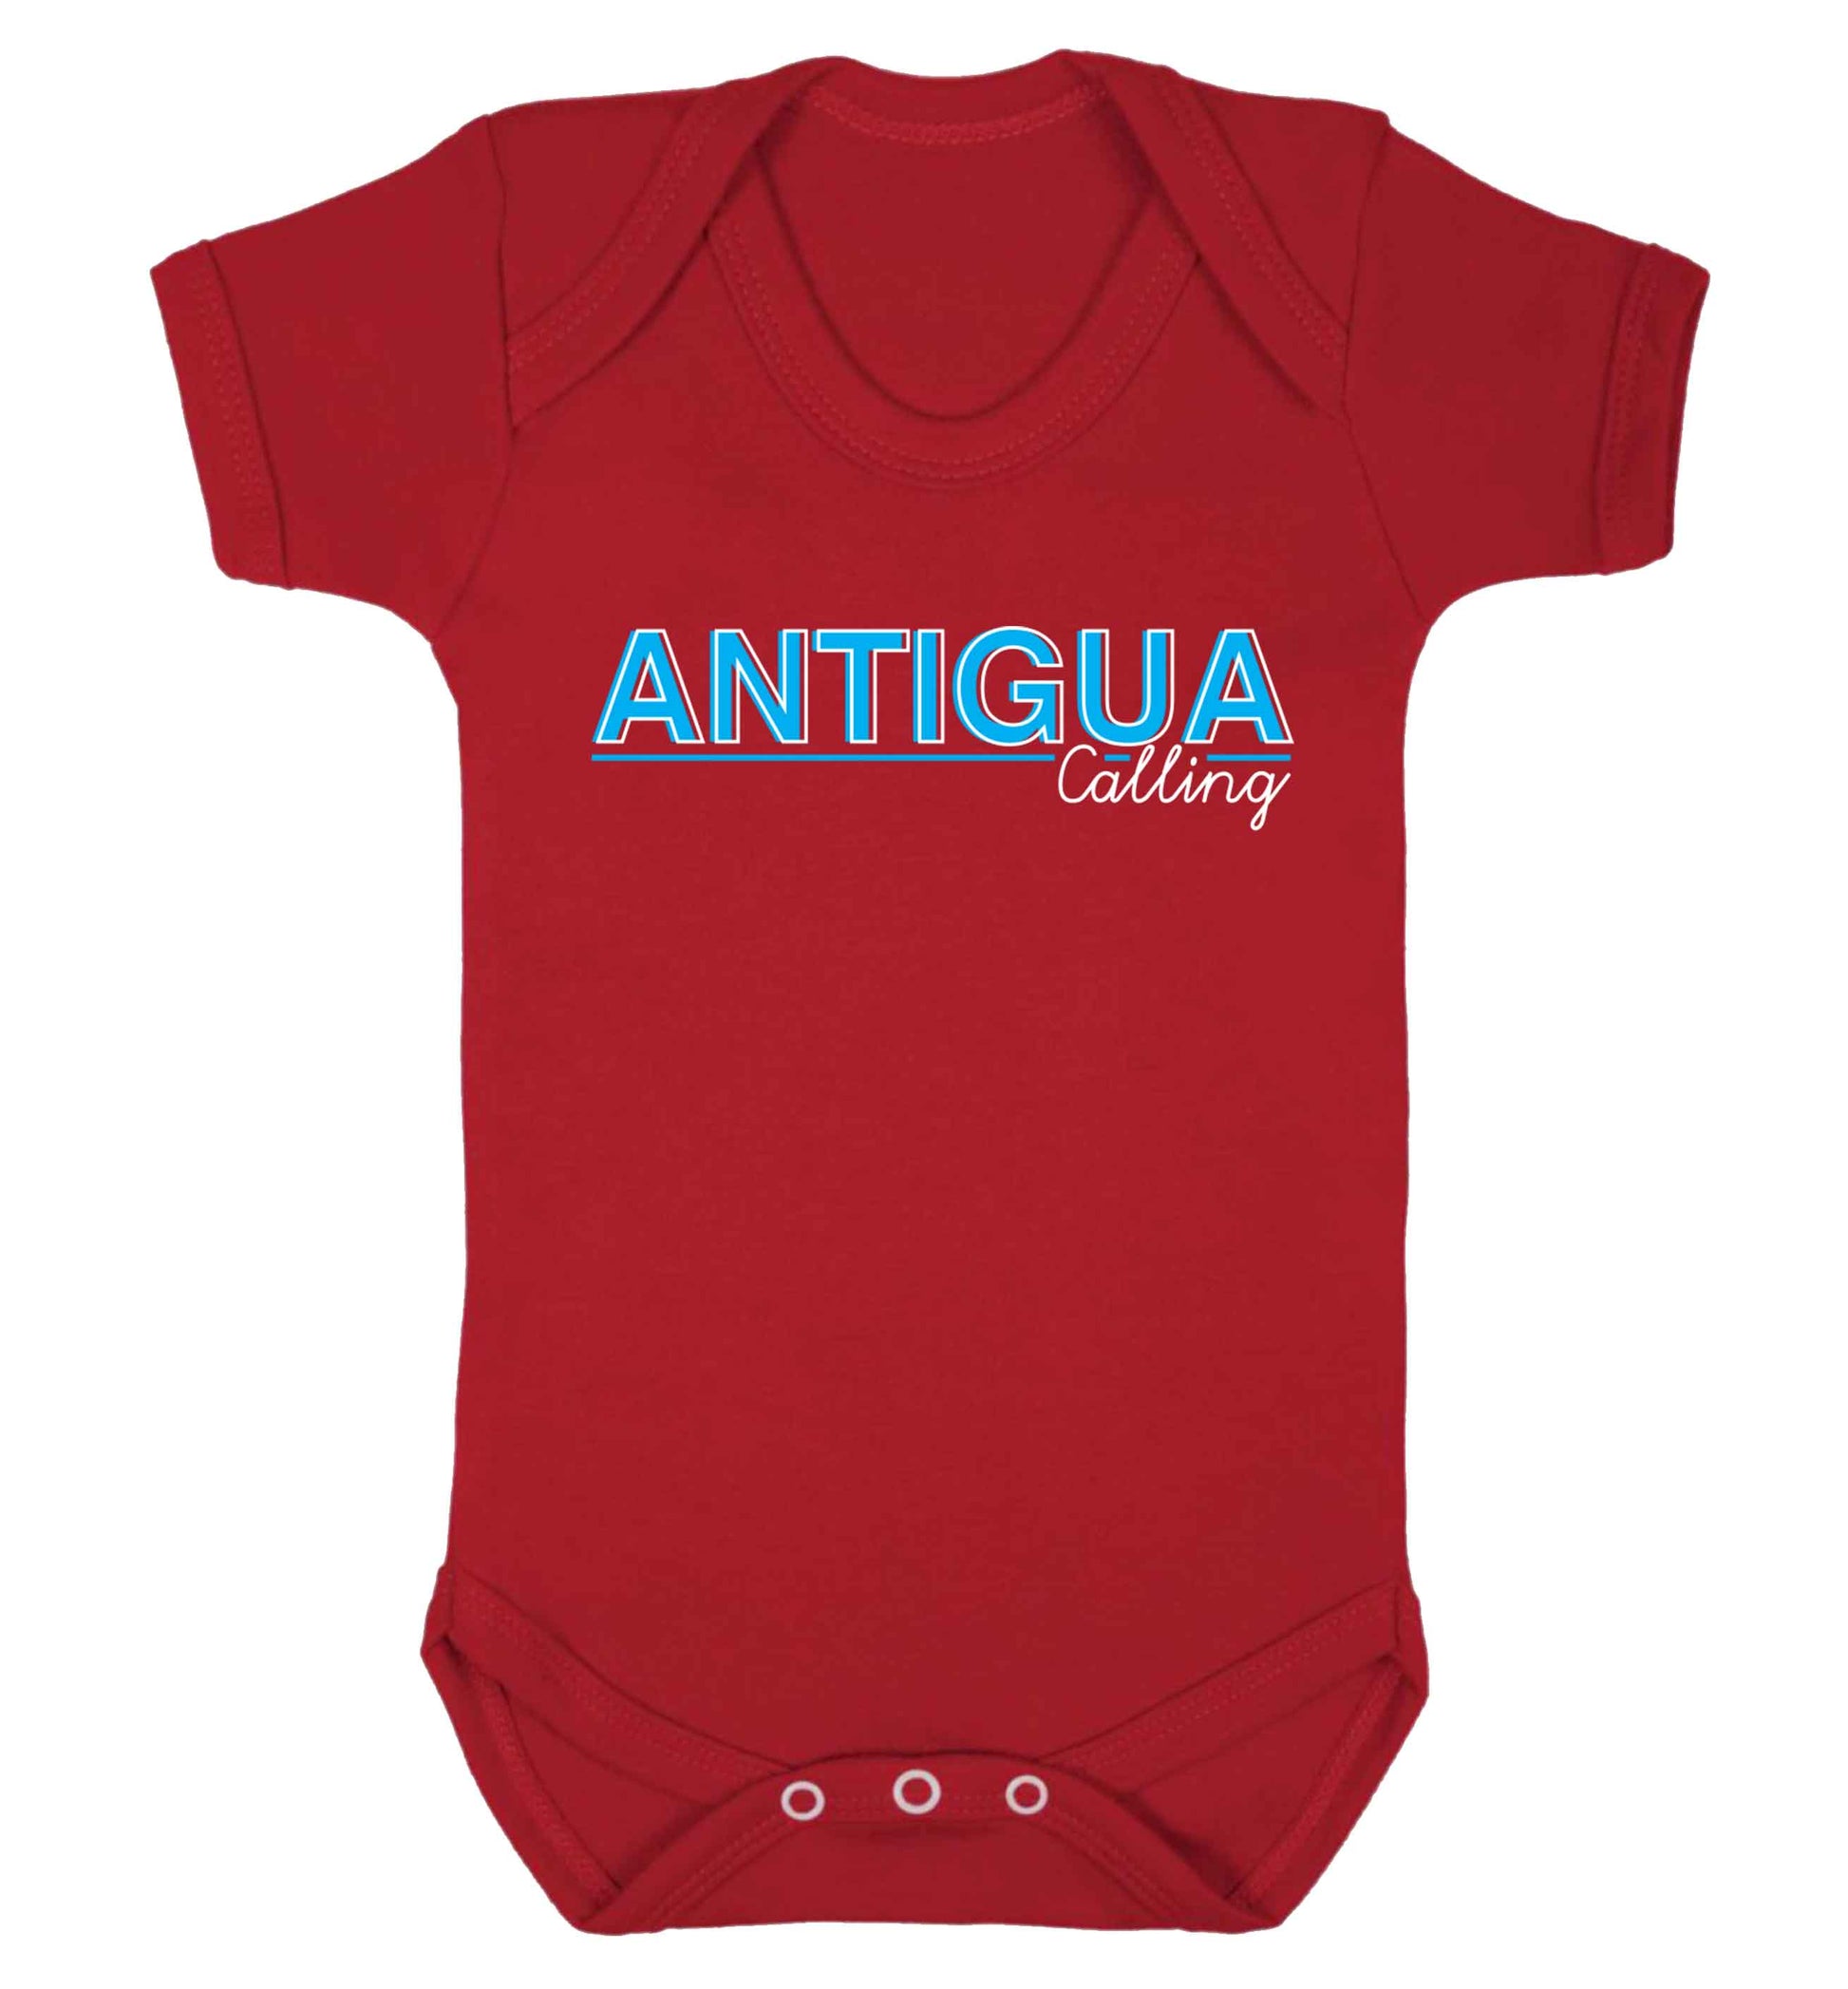 Antigua calling Baby Vest red 18-24 months